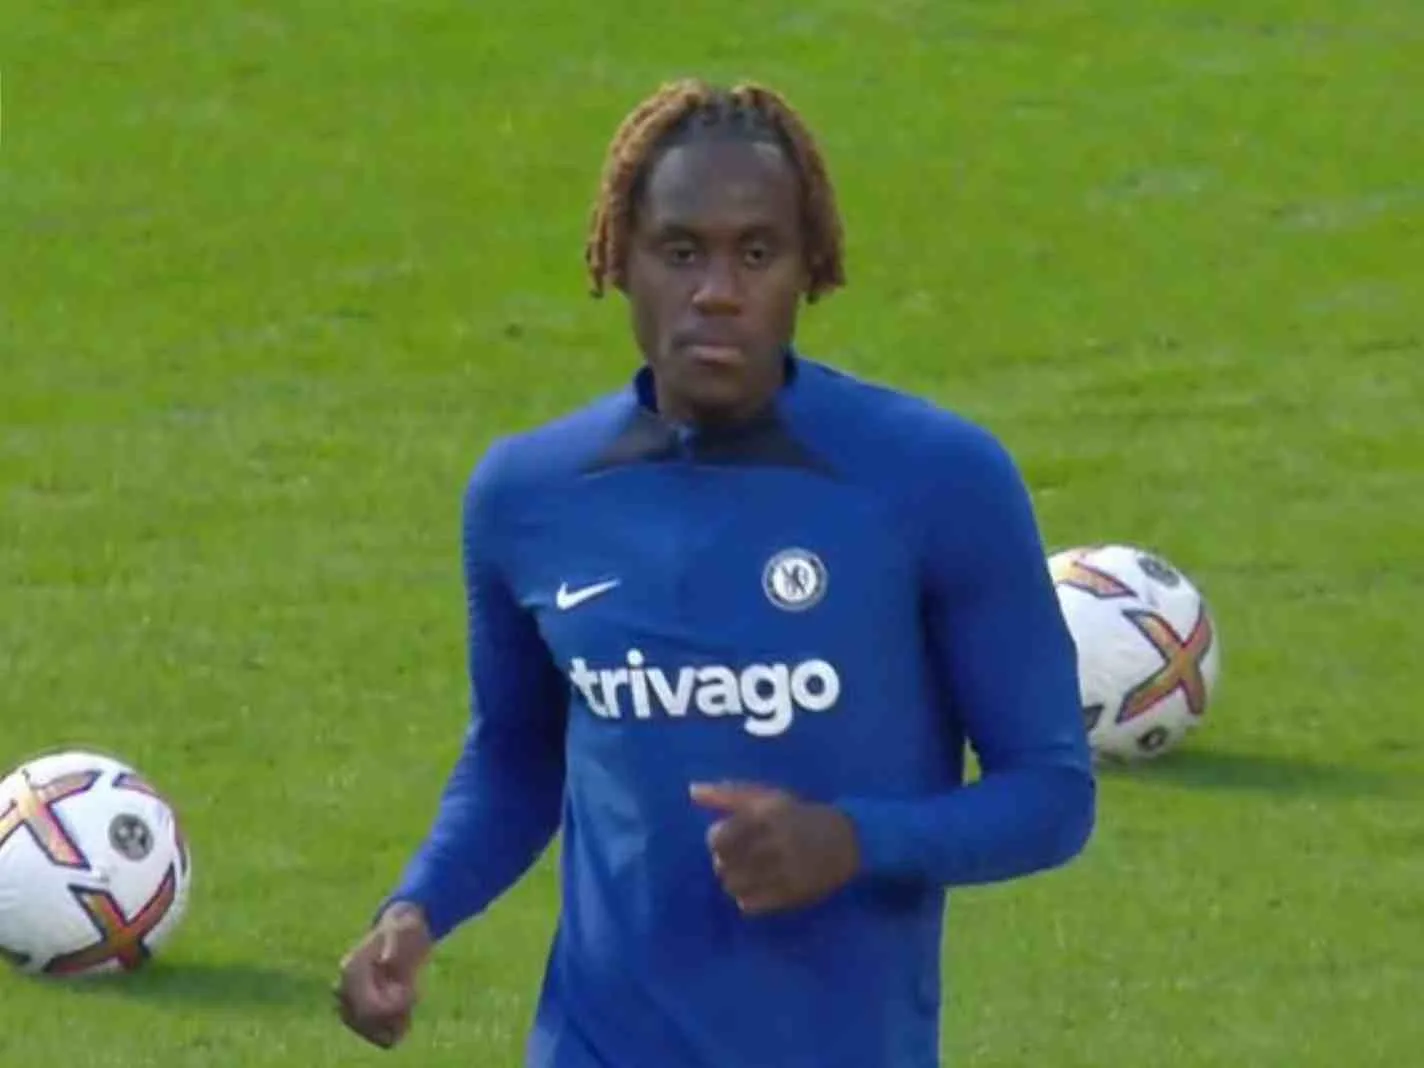 Chelsea's Trevoh Chalobah Reveals Incredible Body Transformation